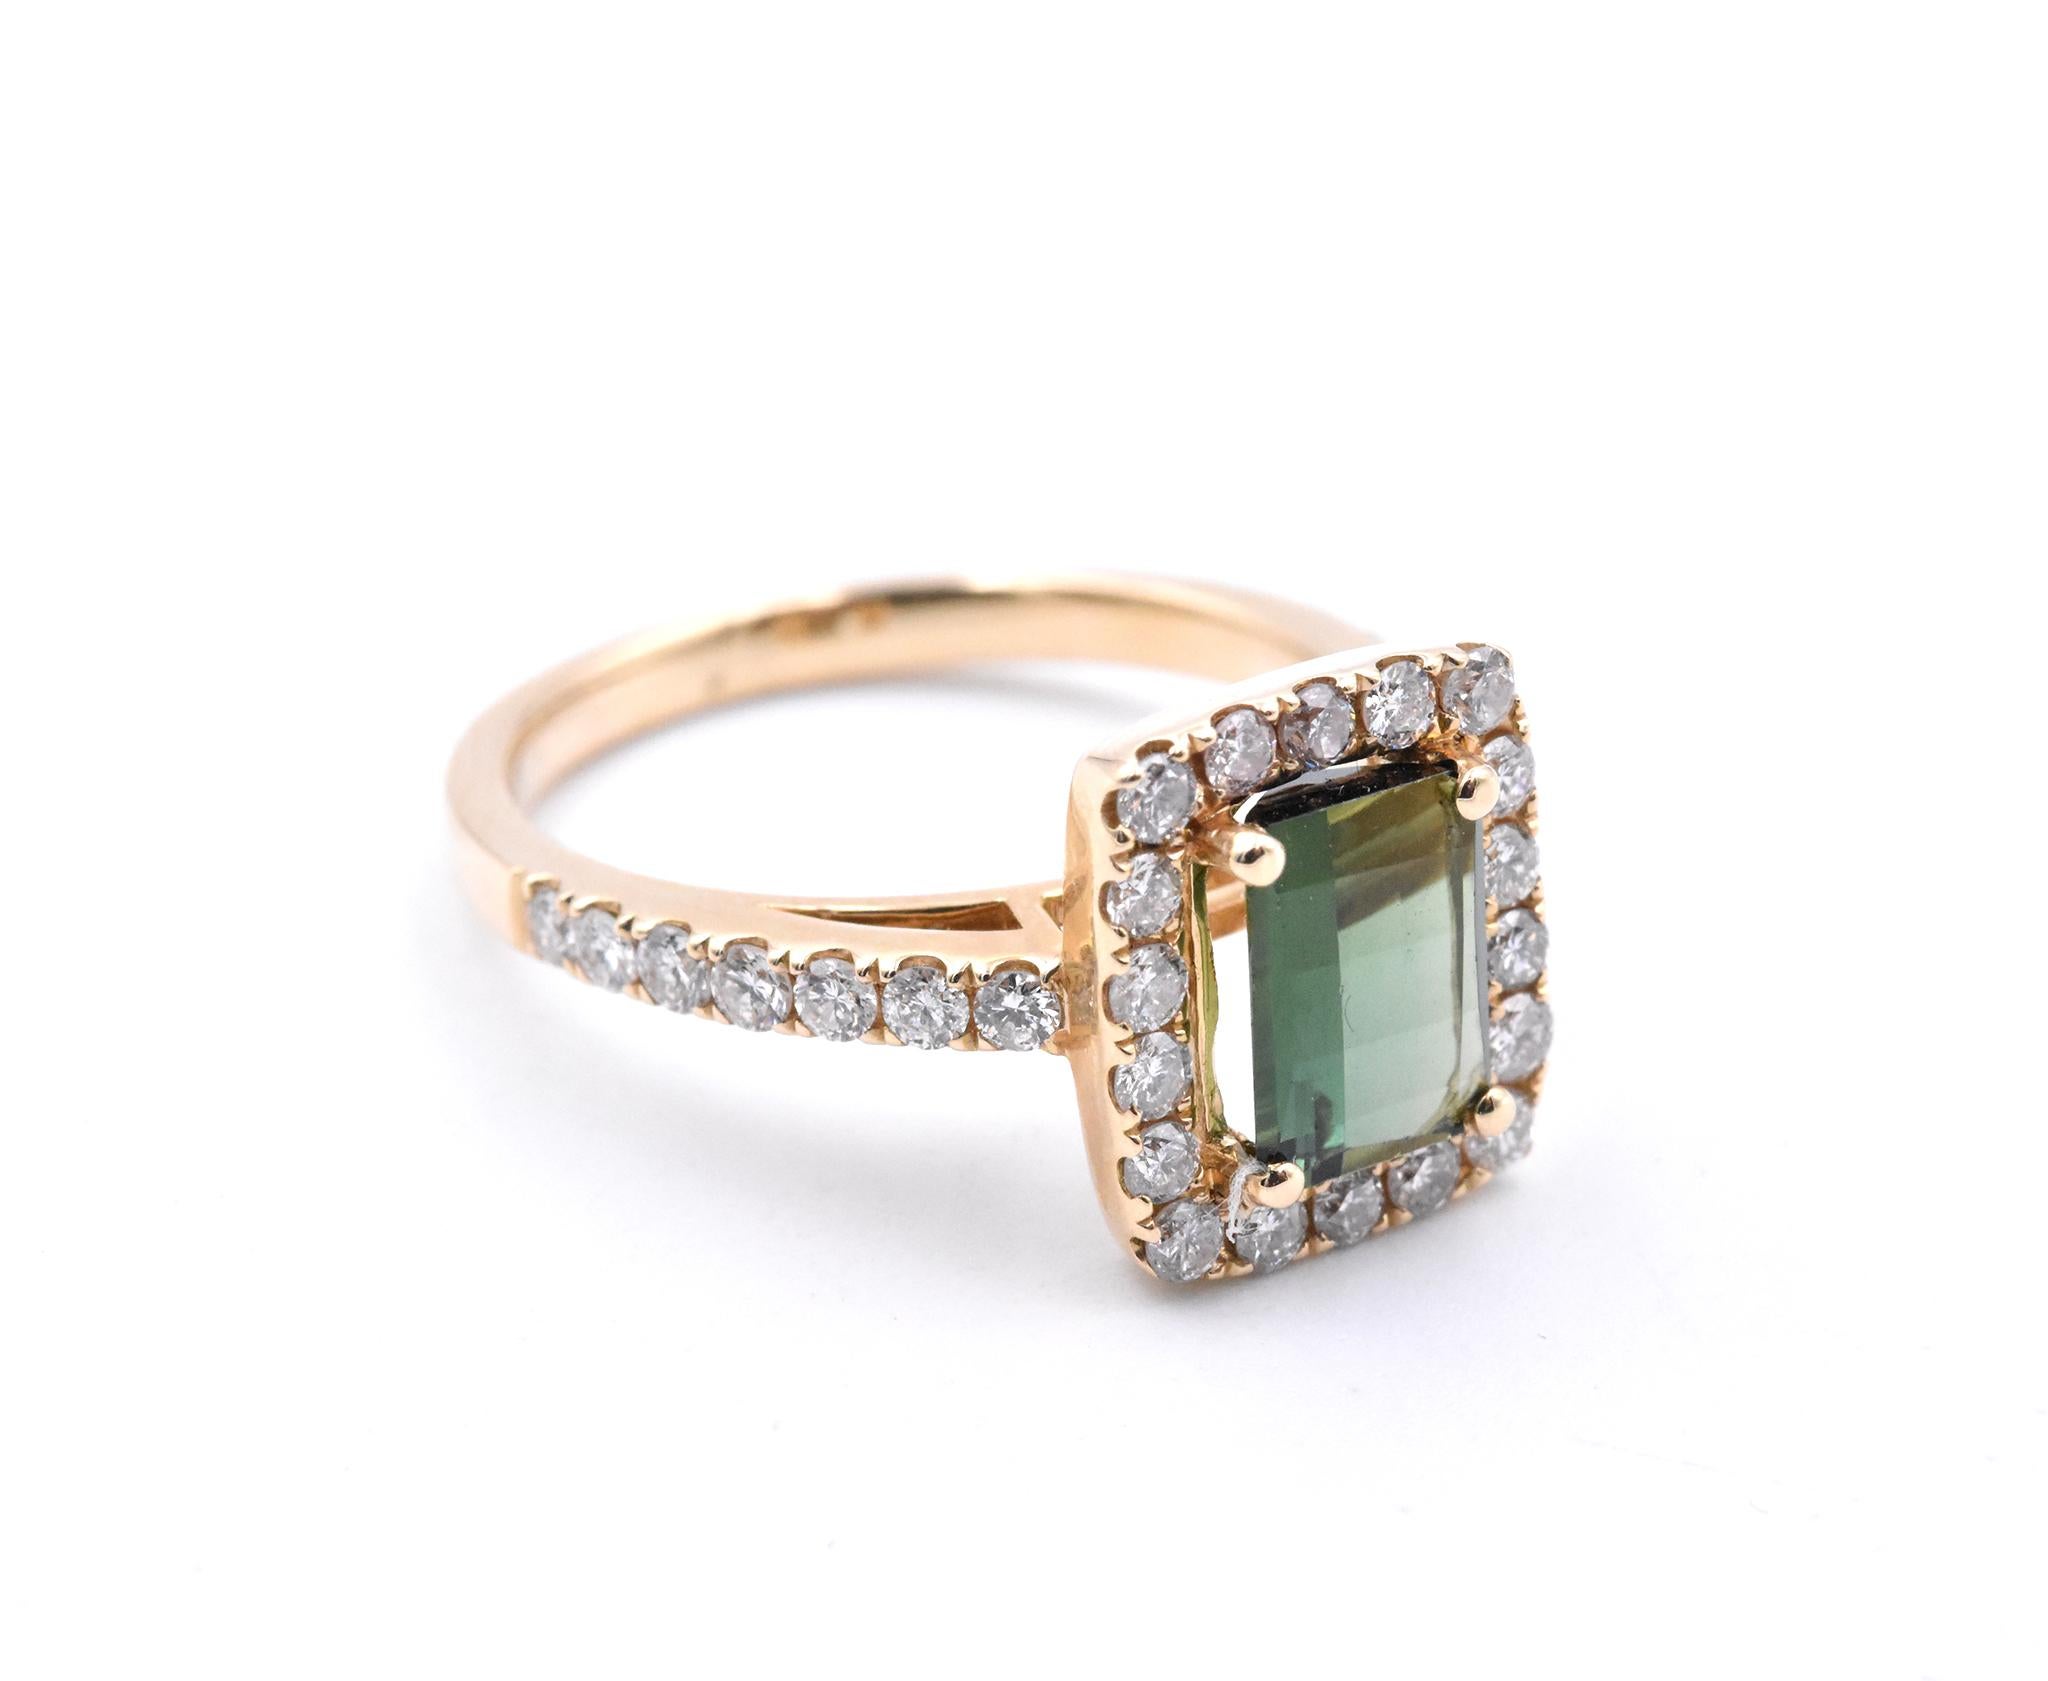 Material: 14k yellow gold
Gemstones: Green Tourmaline = 1.10ct elongated radiant
Certification: AGI 25352
Diamonds: 32 round brilliant cuts = .88cttw
Color: F
Clarity: VS2-SI
Ring Size: 7.5 (please allow two additional shipping days for sizing